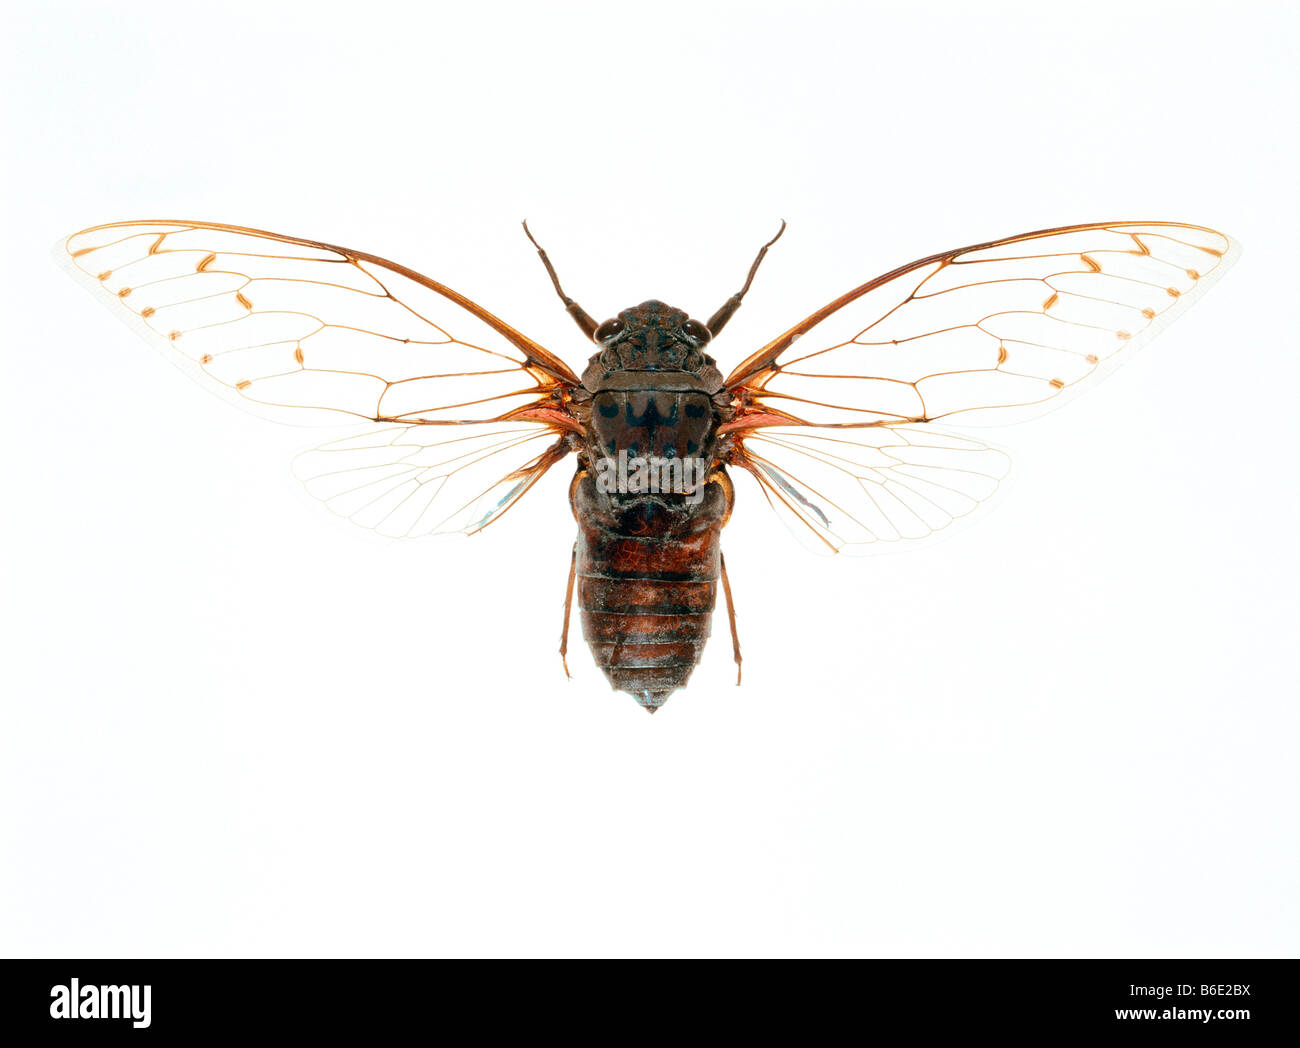 Cicada, (family Cicadidae). Cicadas have twopairs of large, membranous wings. Stock Photo